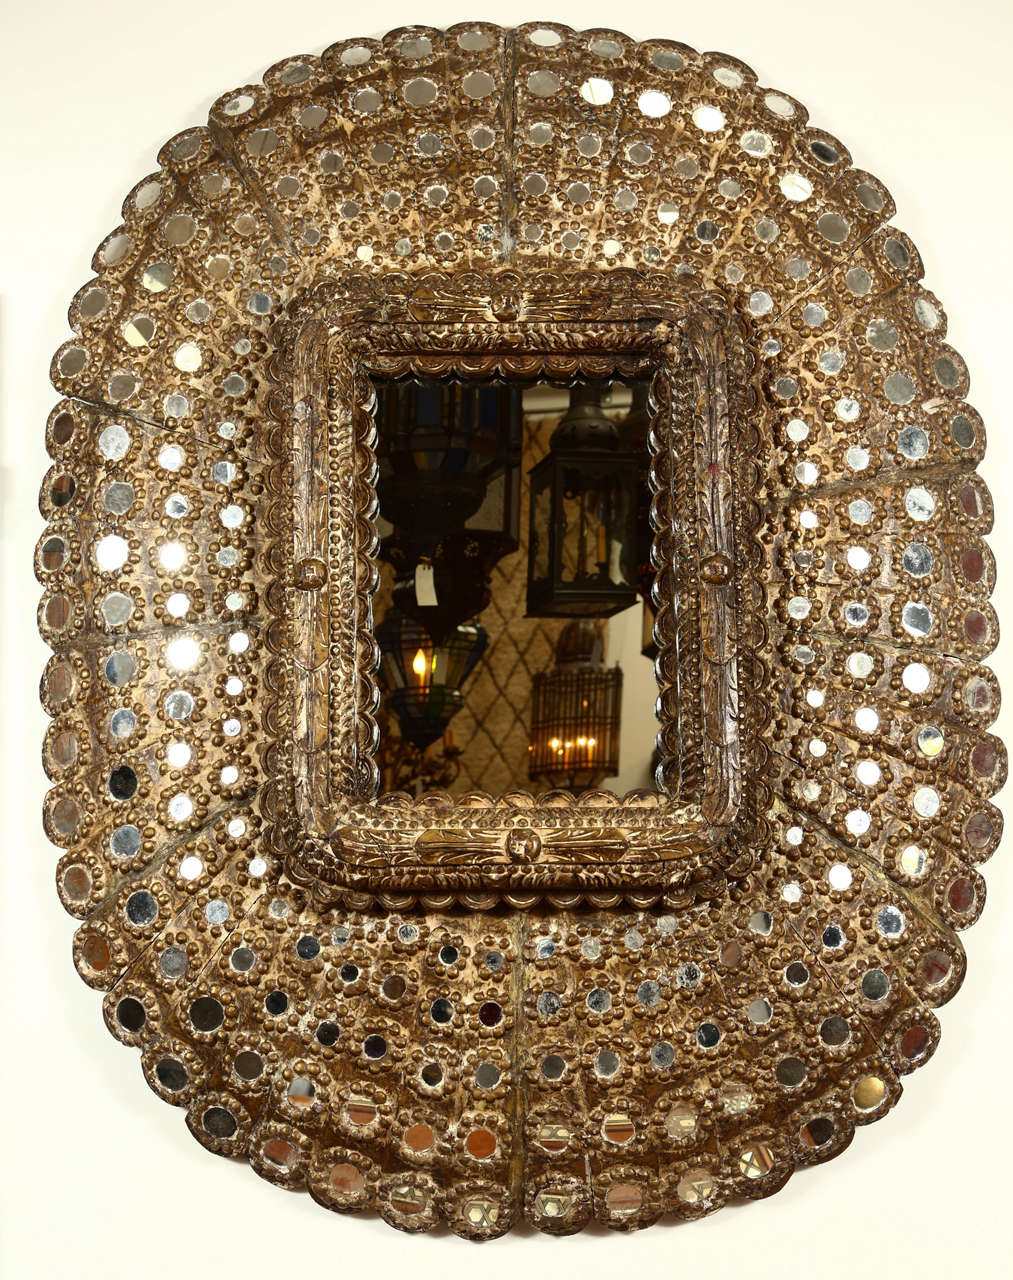 Impressive exotic Hispano Moresque large scale hand-carved gilt wood inset with a multitude of small mirrors.
Could be hang both ways.